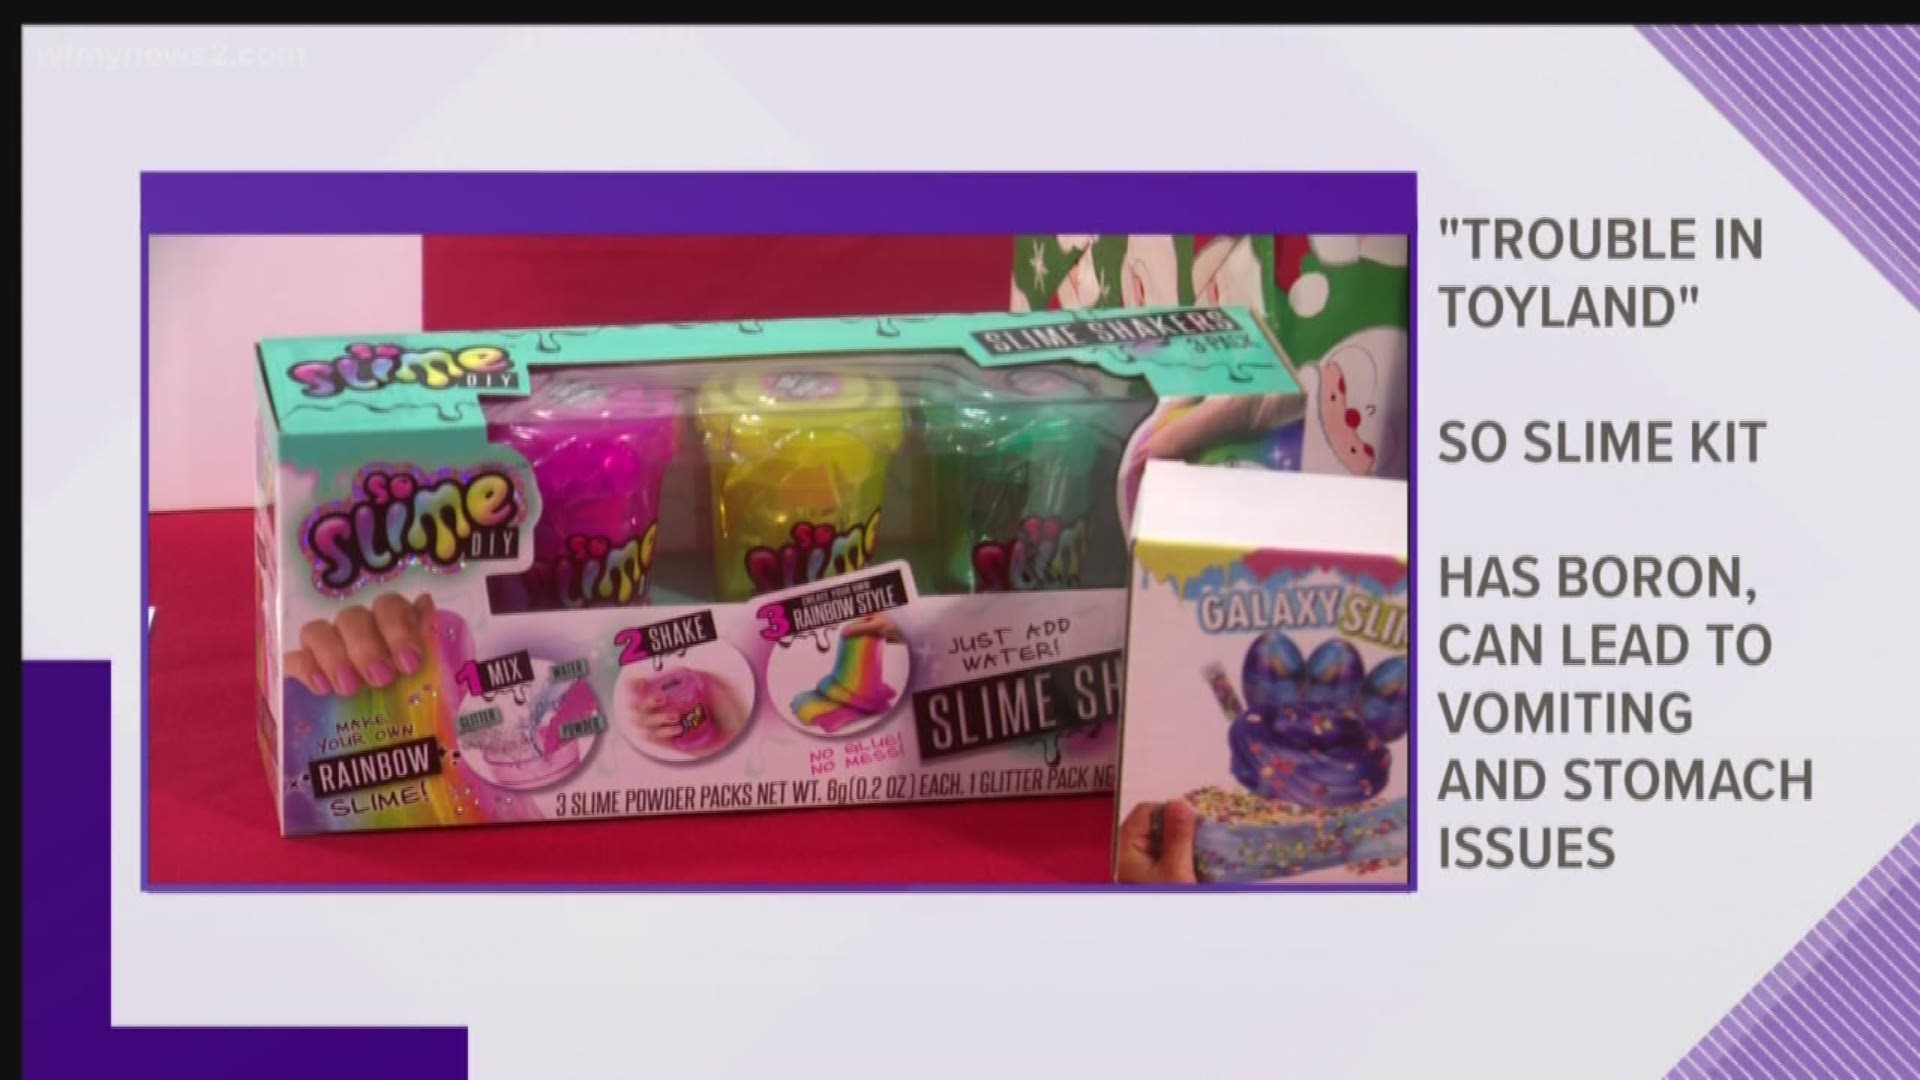 Slime and magnets are 2 of the new items experts want you to watch out for.